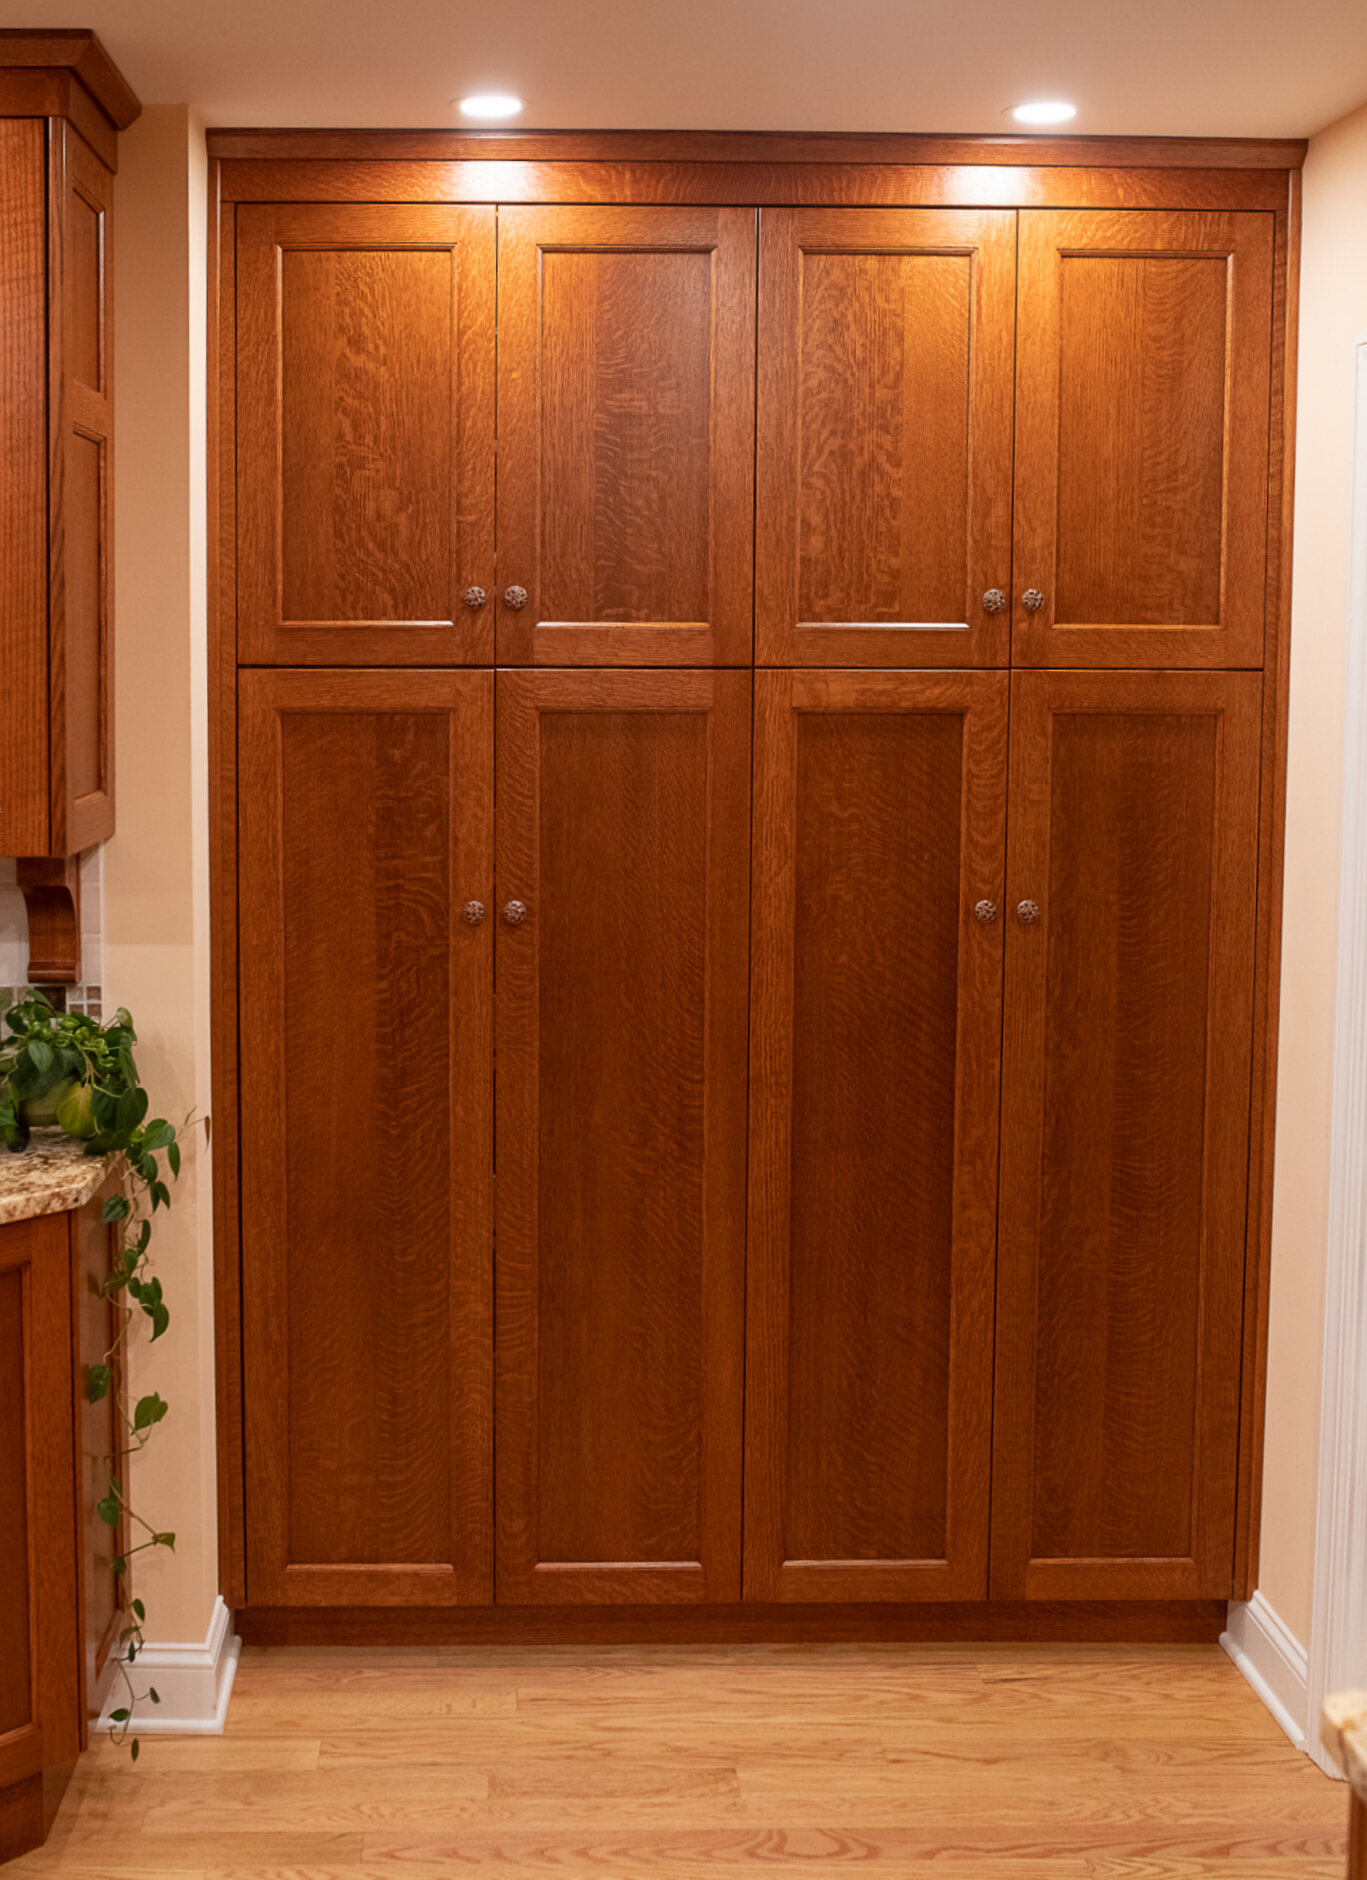 Double door pantries with pull out shelves provide plenty of storage.